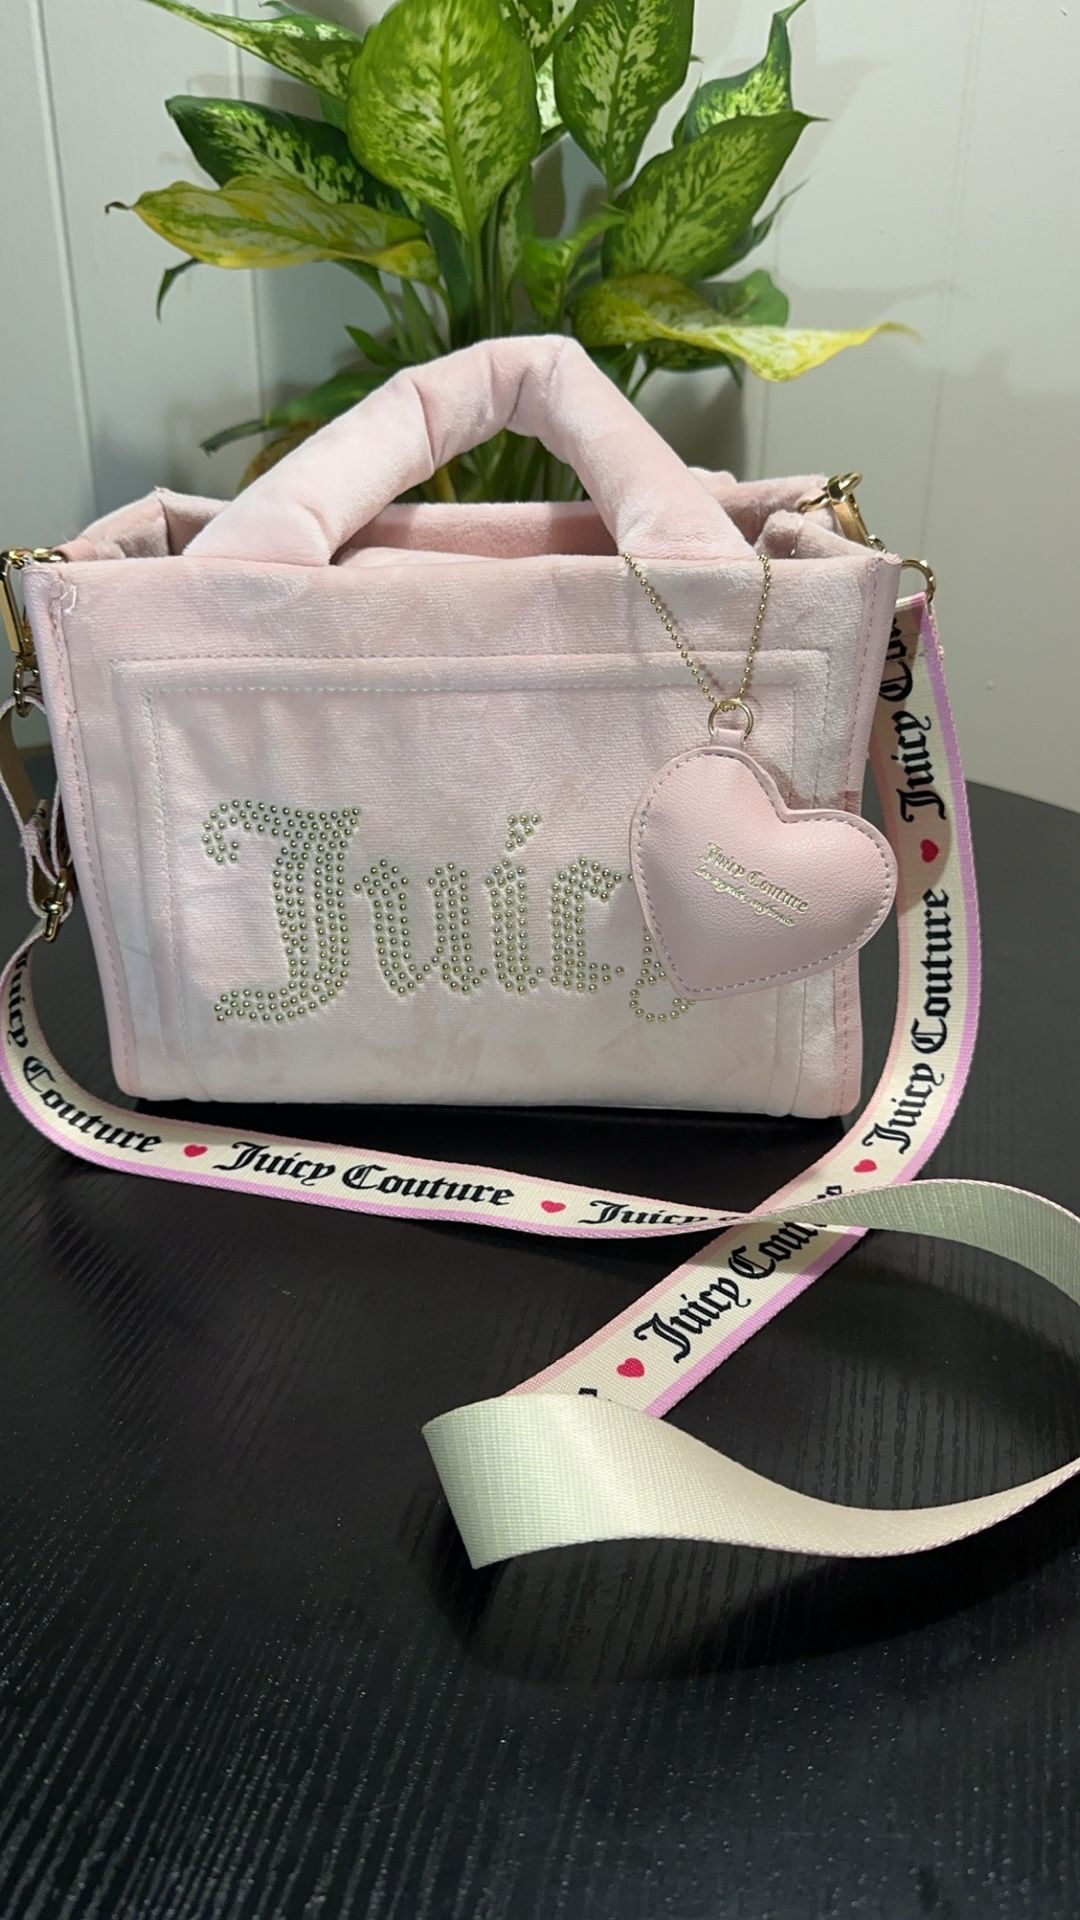 Juicy Couture Spender Purse 